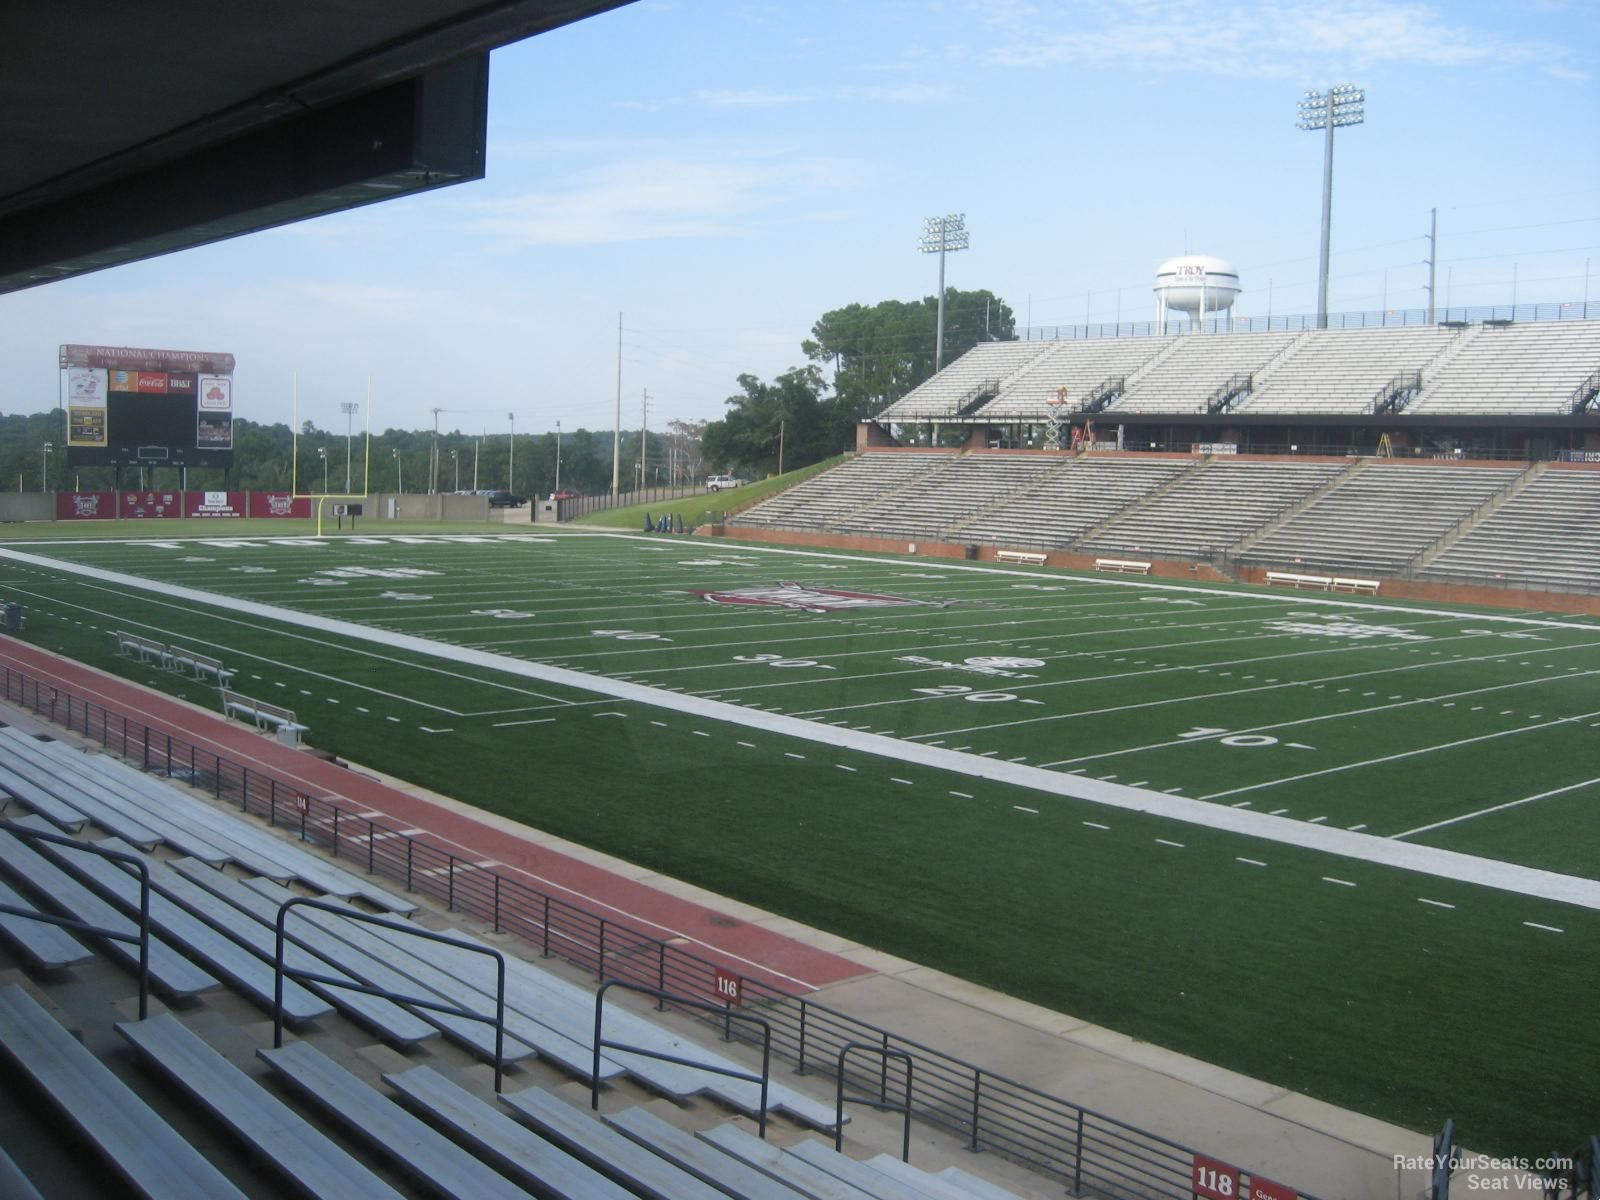 section 120, row 15 seat view  - troy memorial stadium